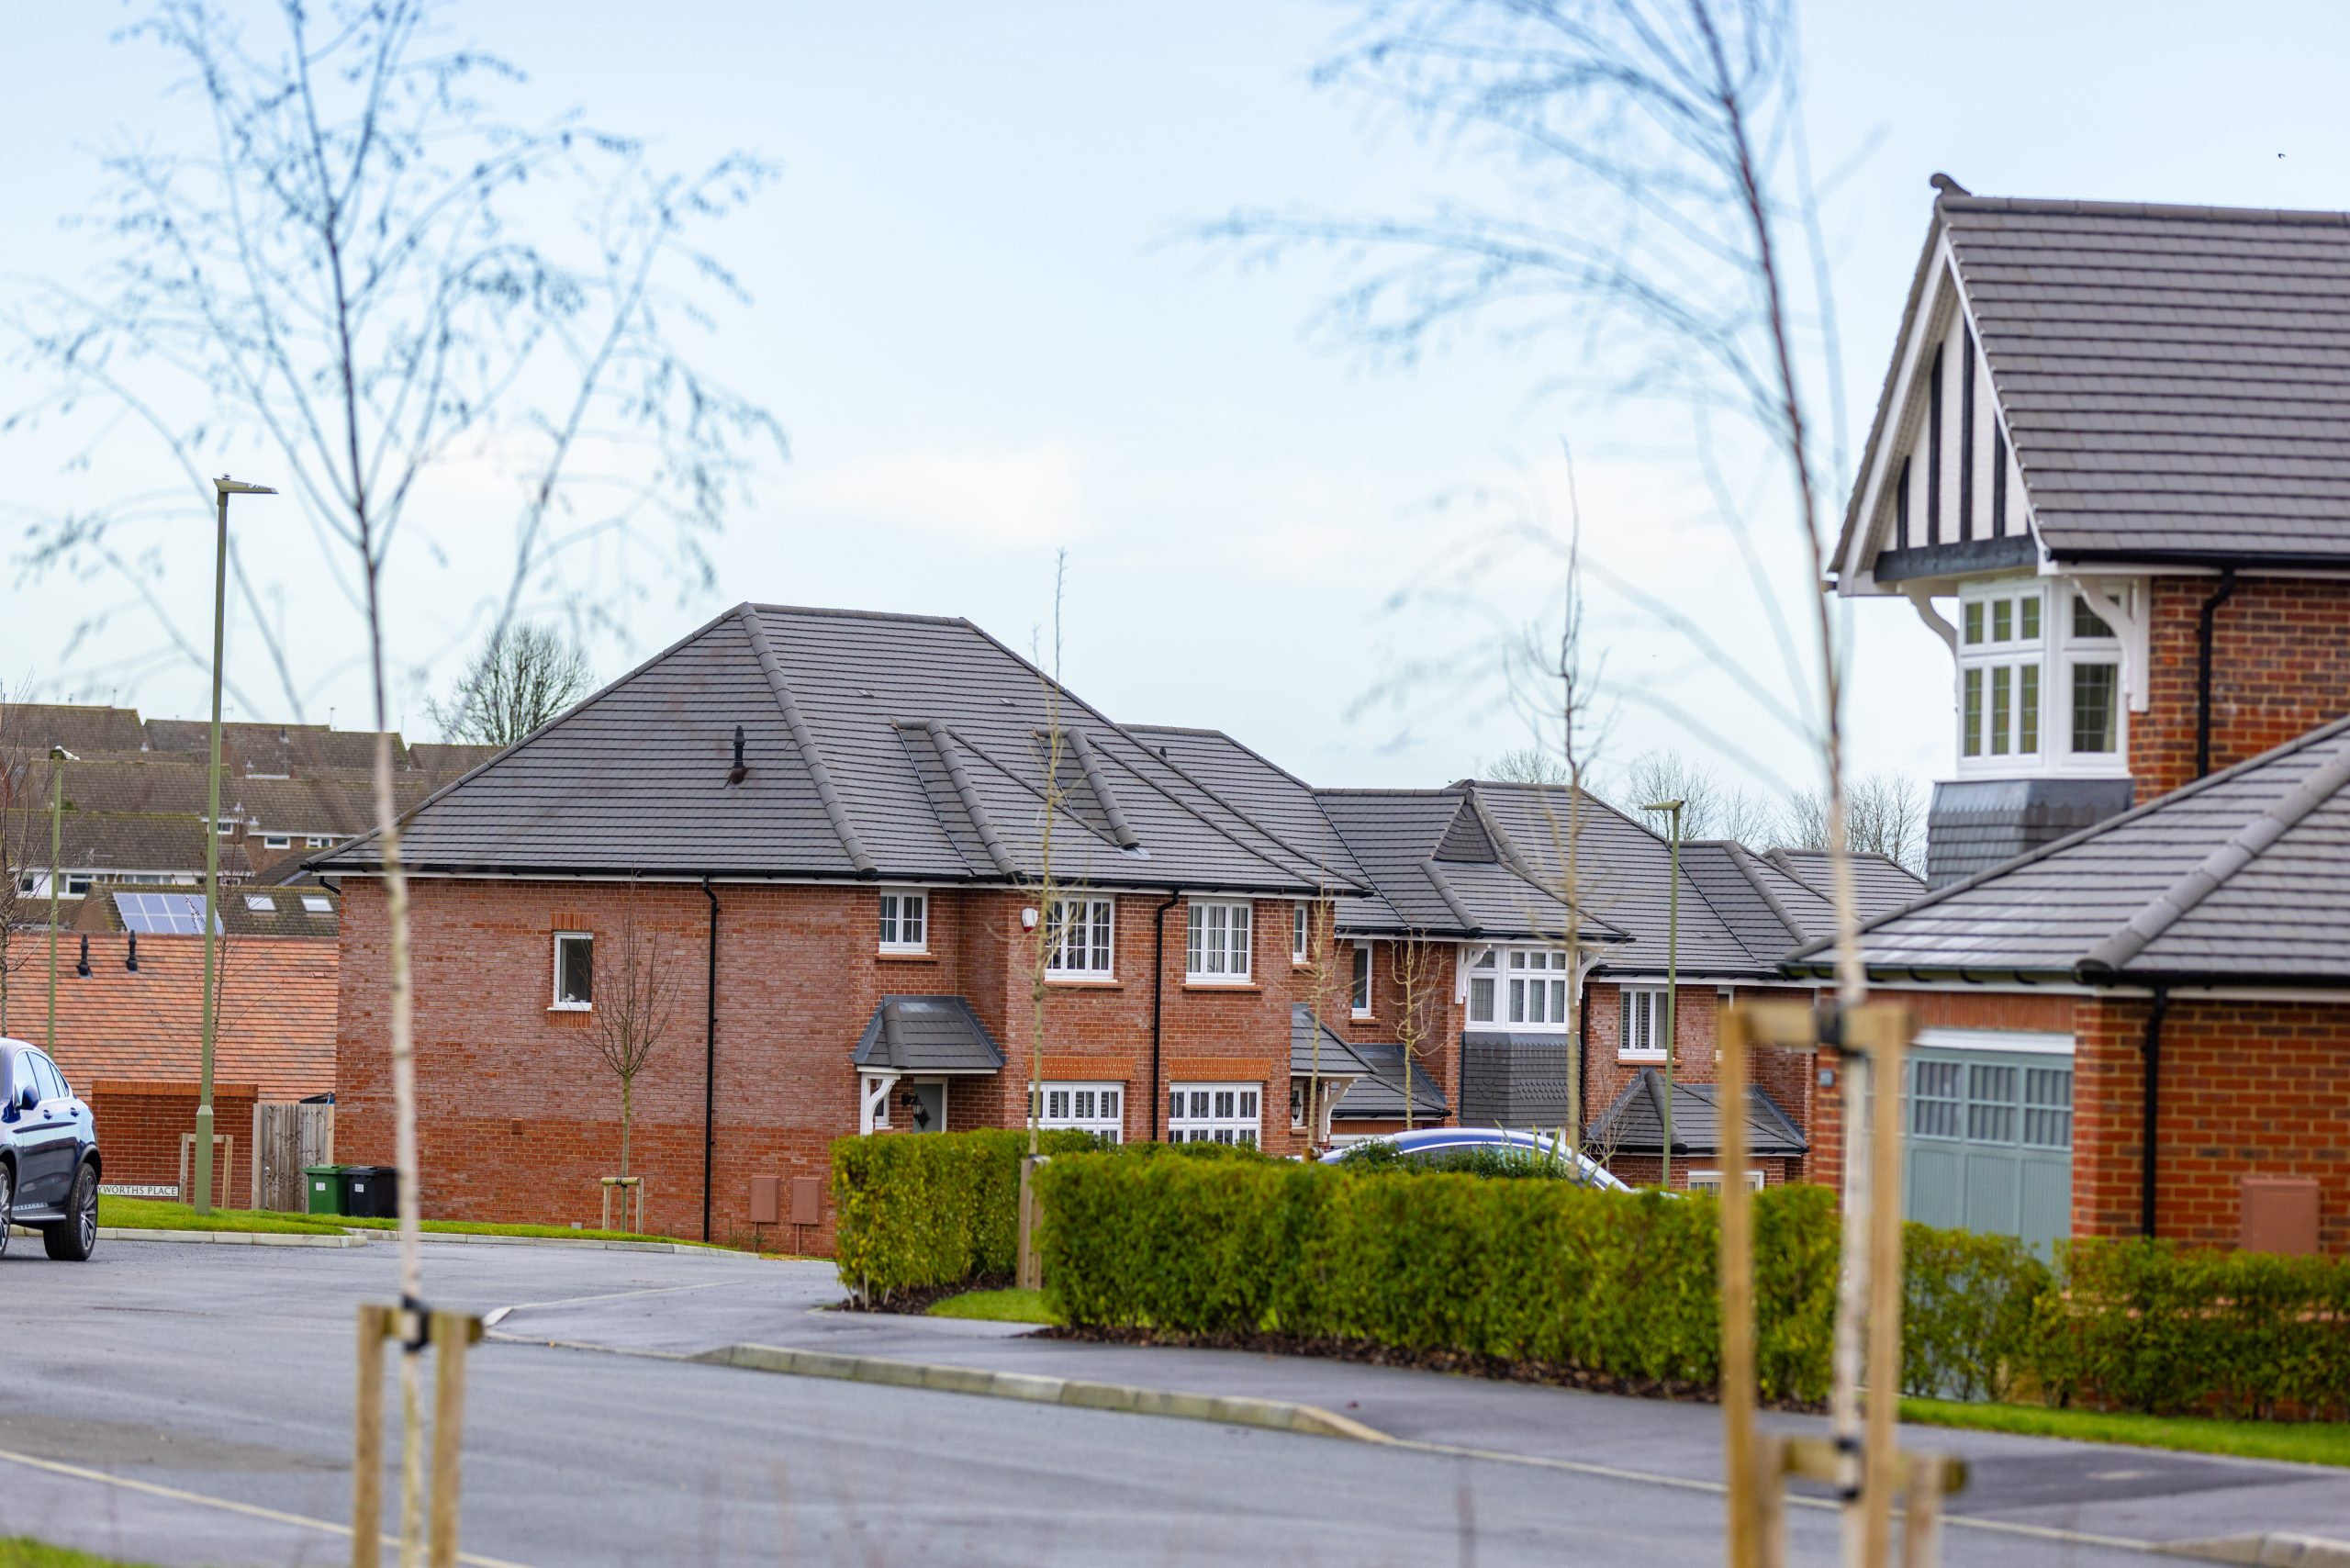 New homes in Alton, Hampshire promoted by Hallam Land.